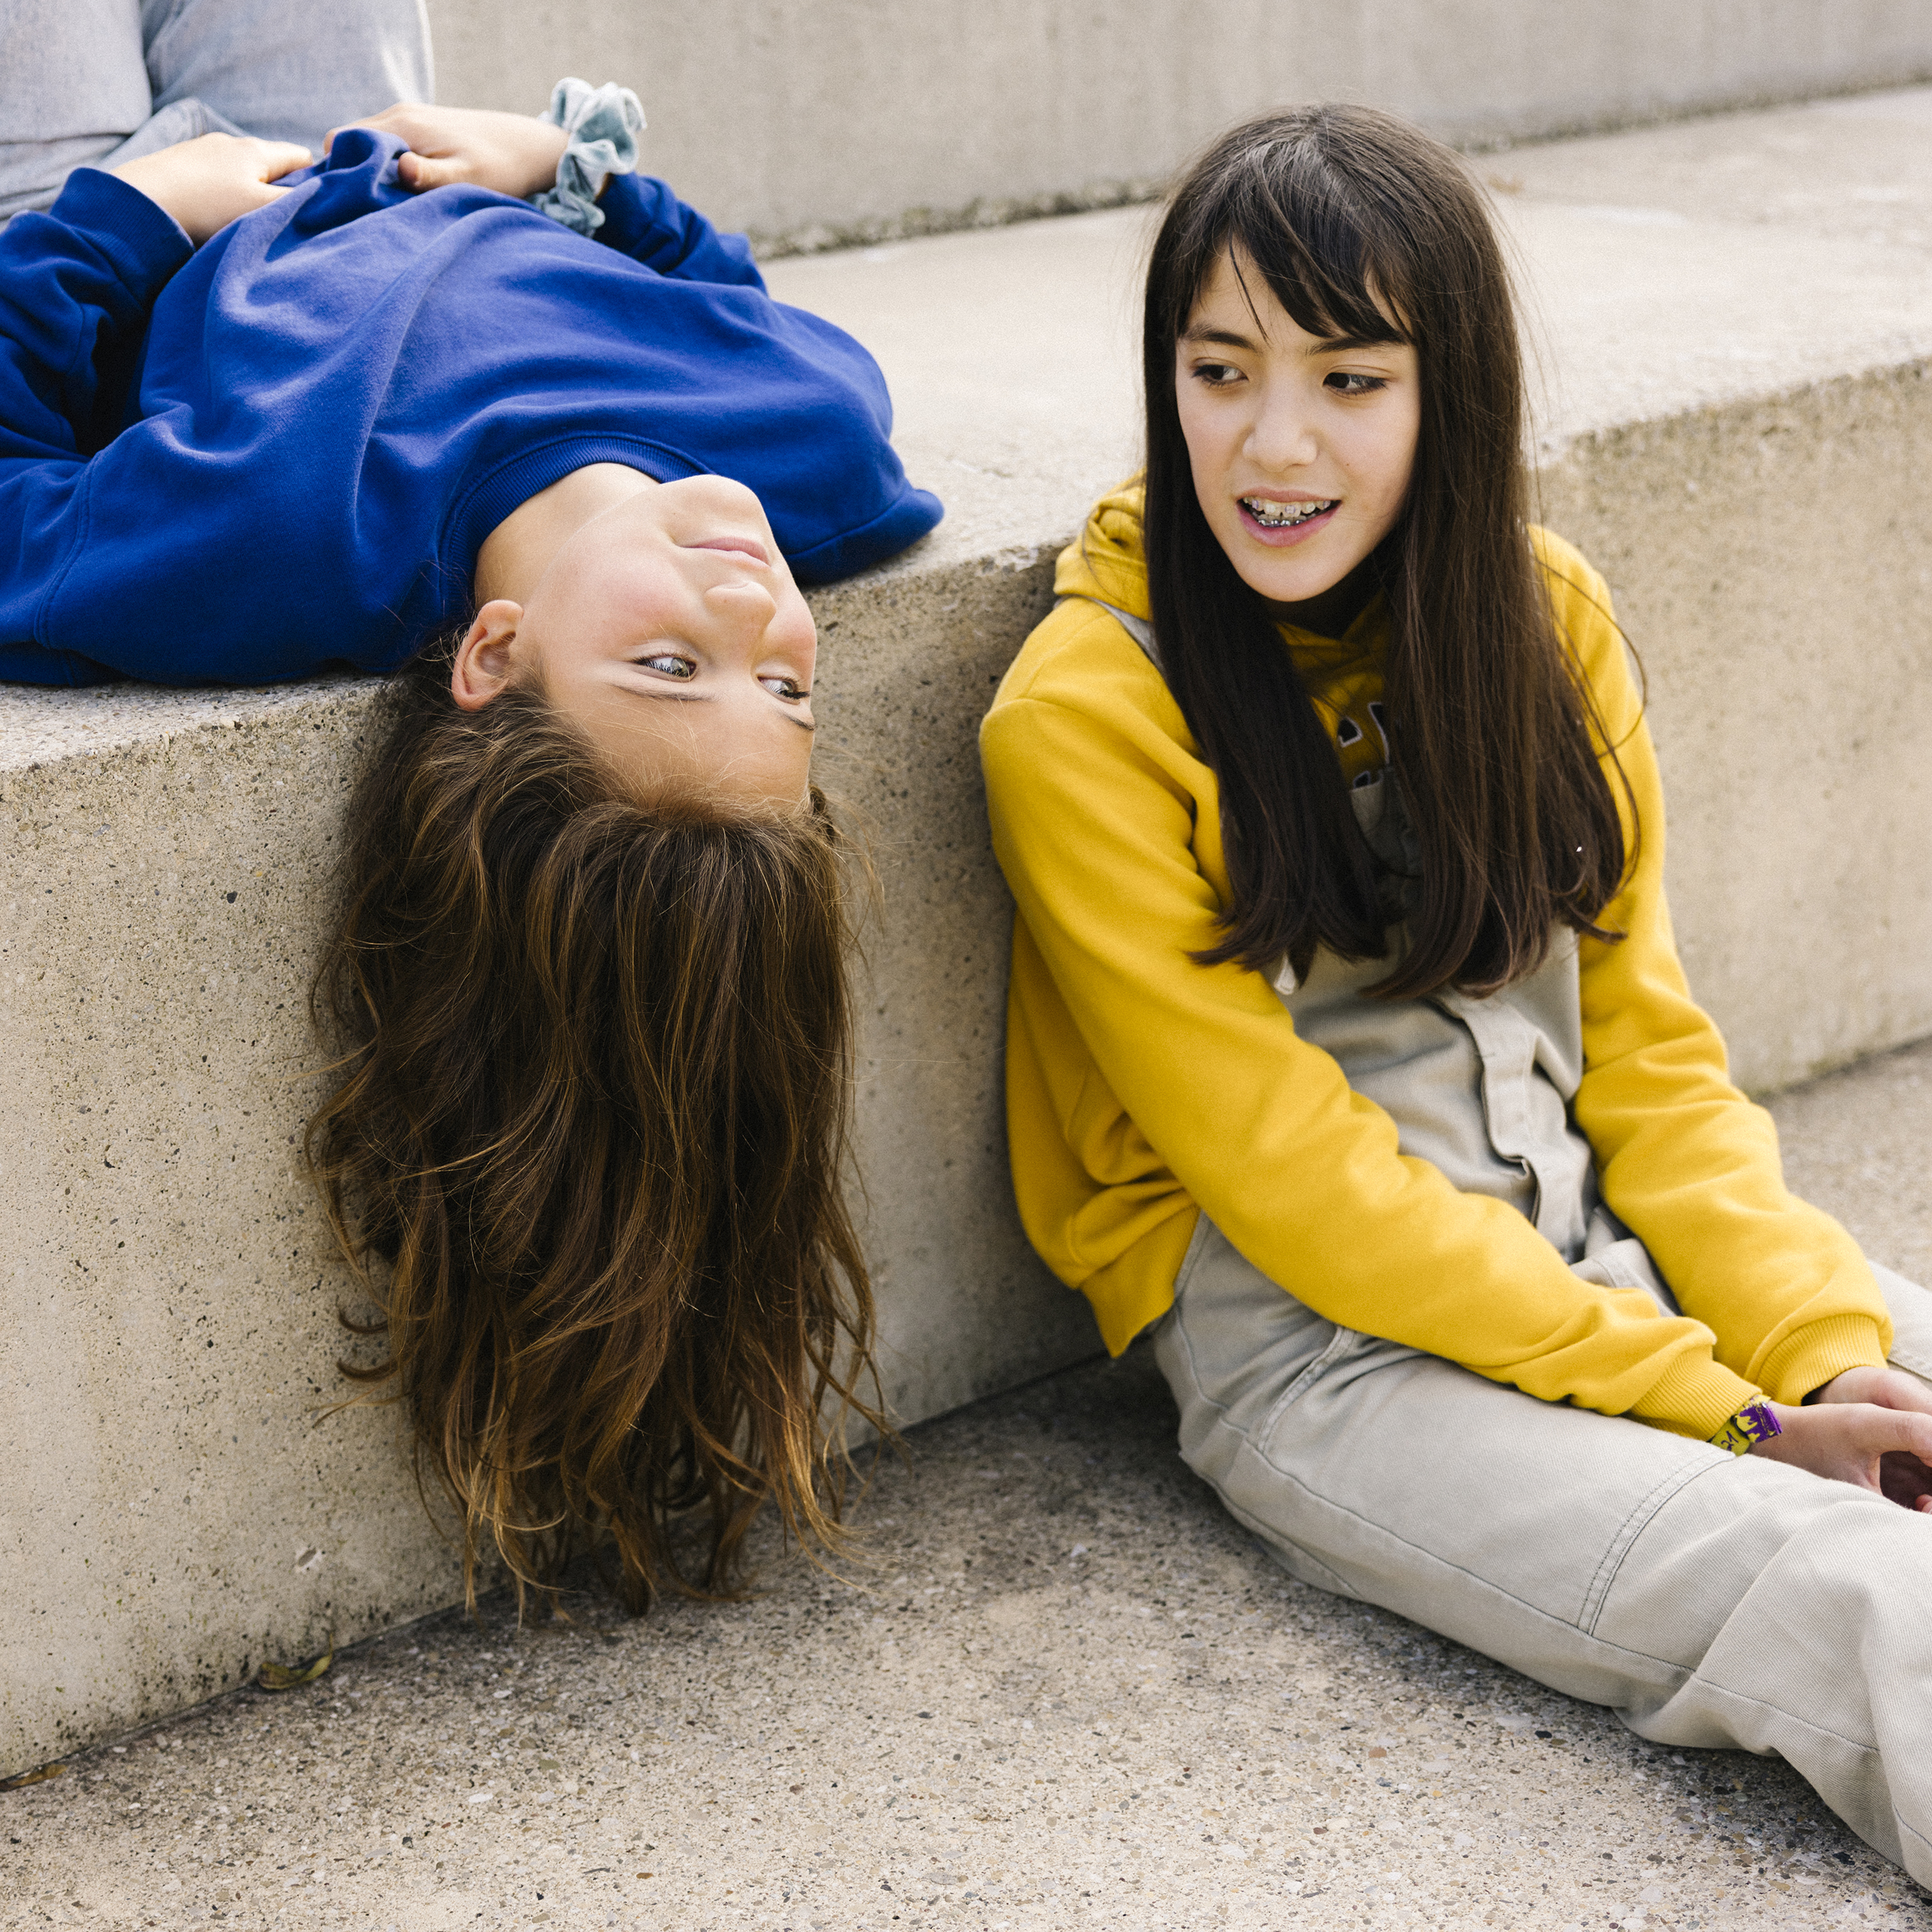 Two teenagers are talking on a concrete staircase, one is sitting on the step while the other is lying on her back on the step with her head hanging down.